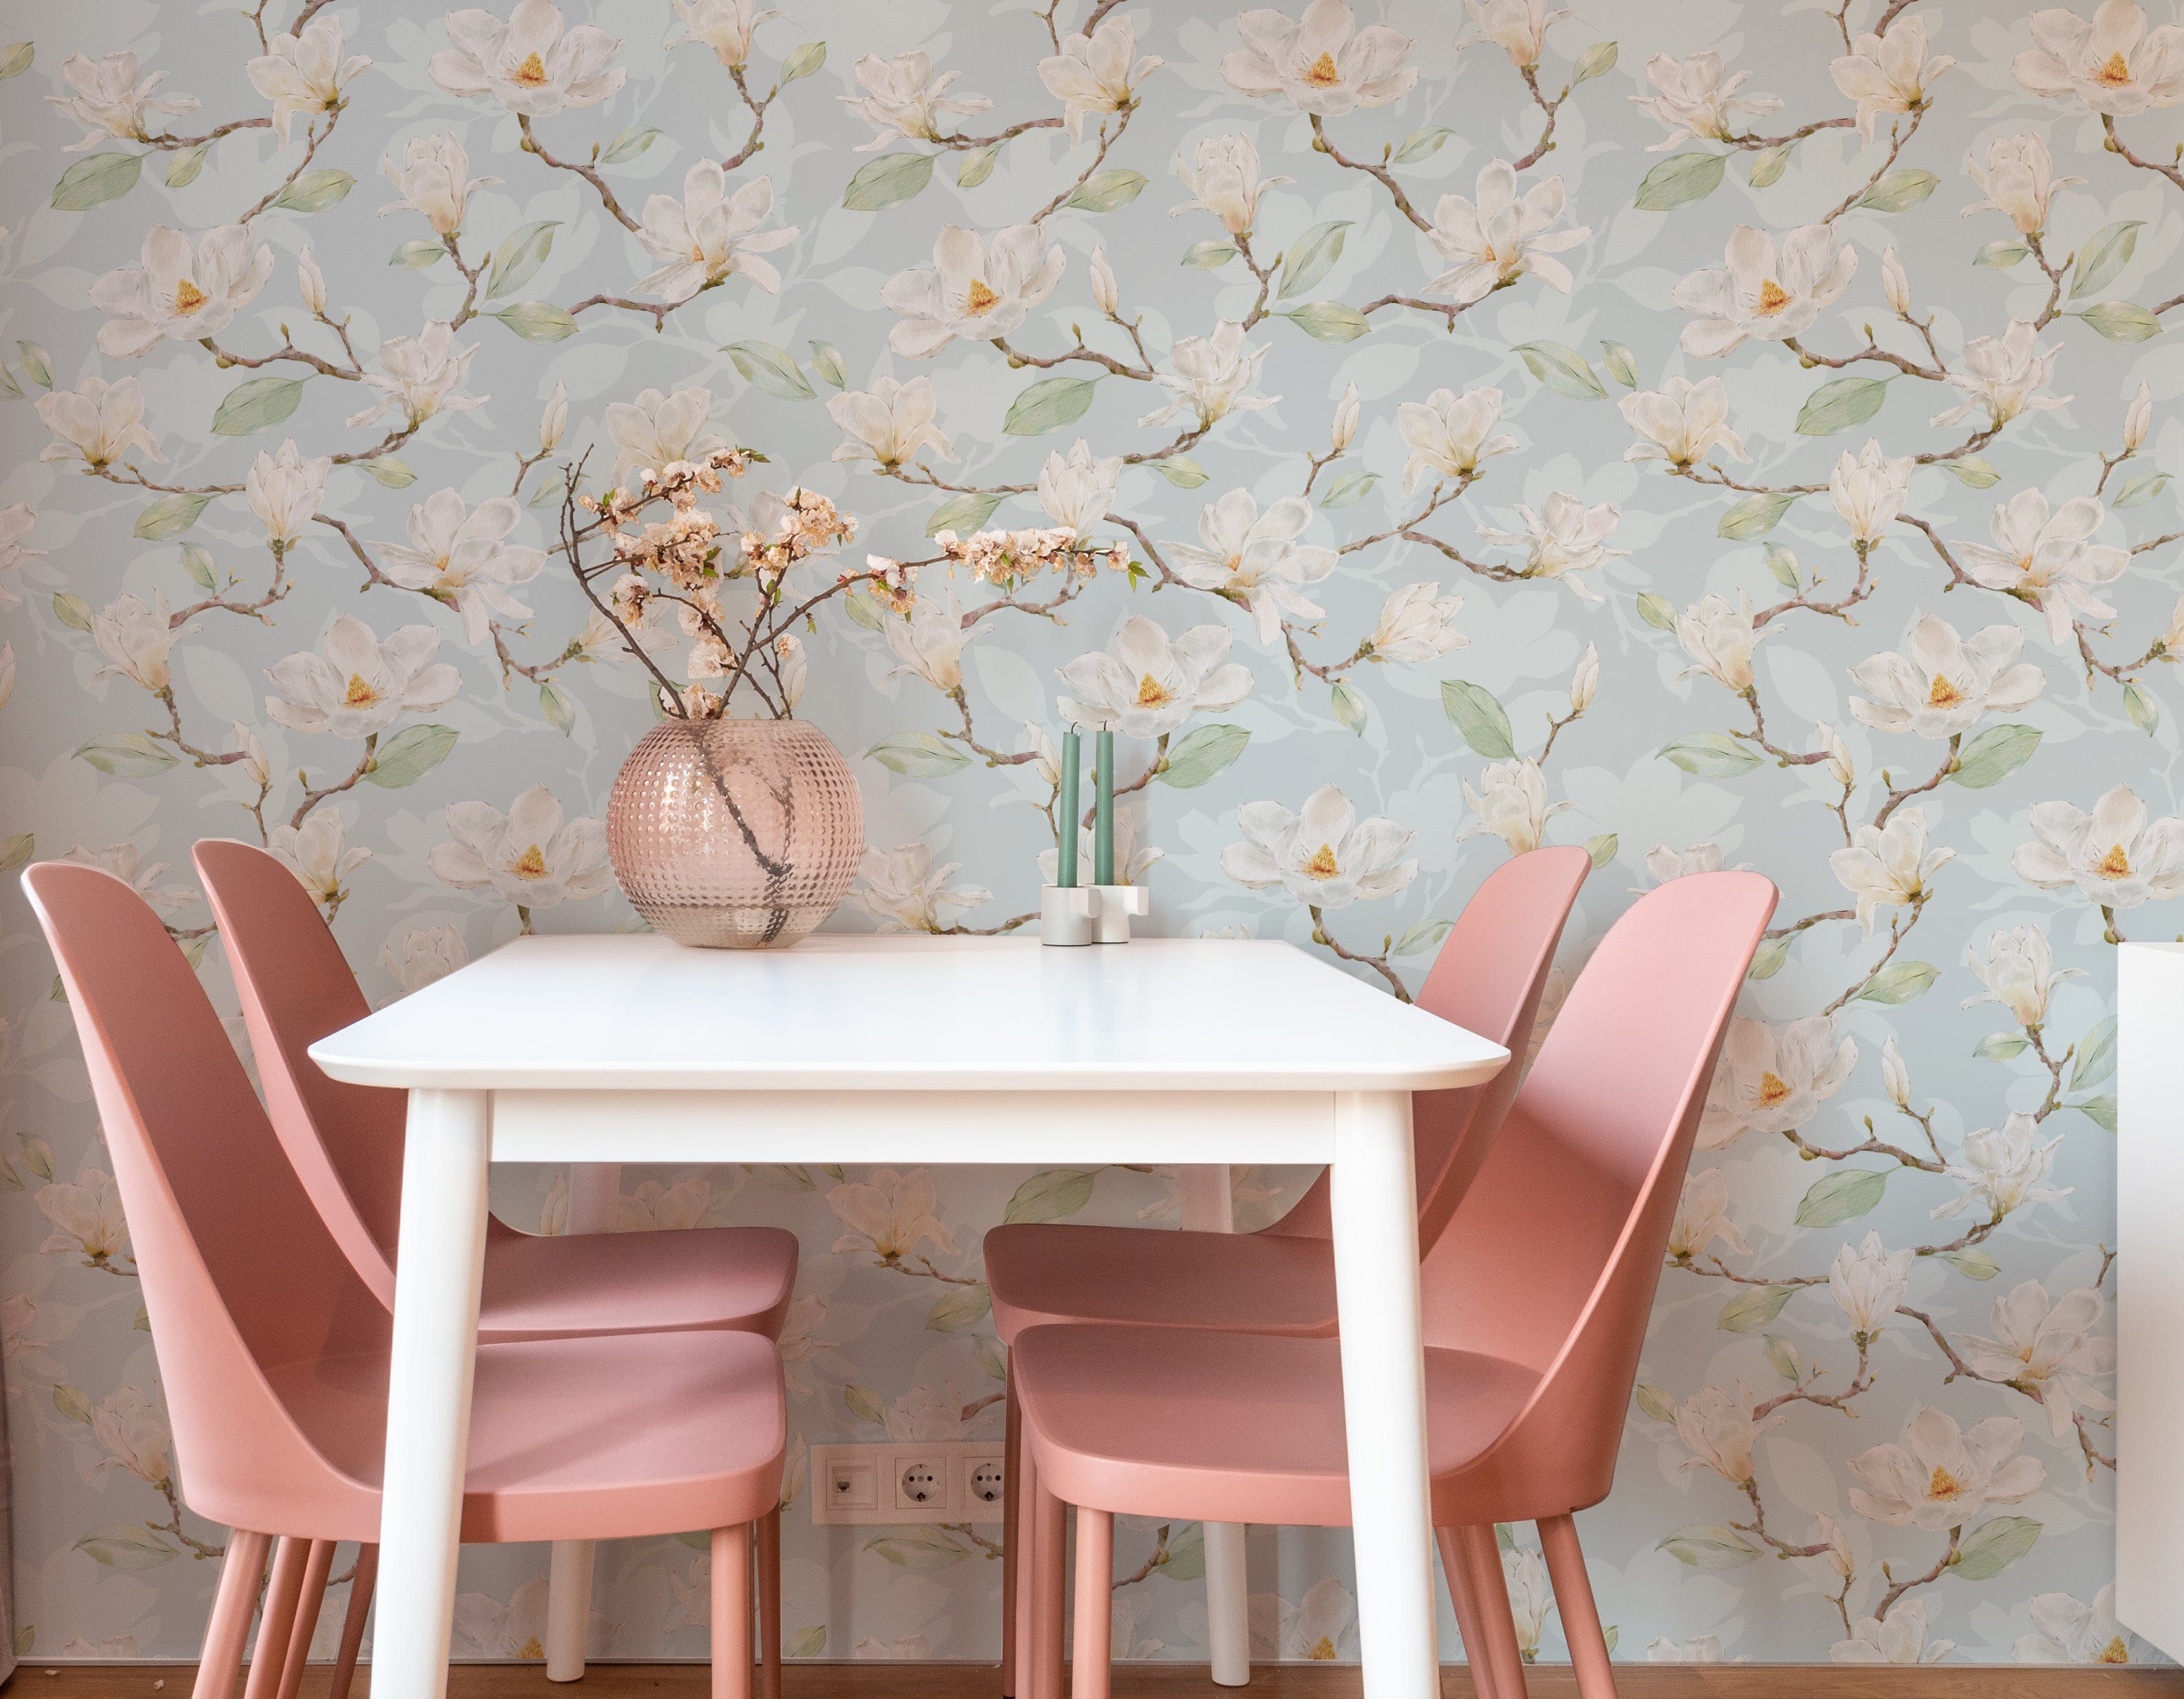 A cozy dining area with walls covered in 'Watercolour Magnolia Wallpaper II', creating a tranquil and inviting environment. A simple white table is flanked by dusty pink chairs, and a round textured vase with branches sits in the middle, echoing the wallpaper's natural motif.